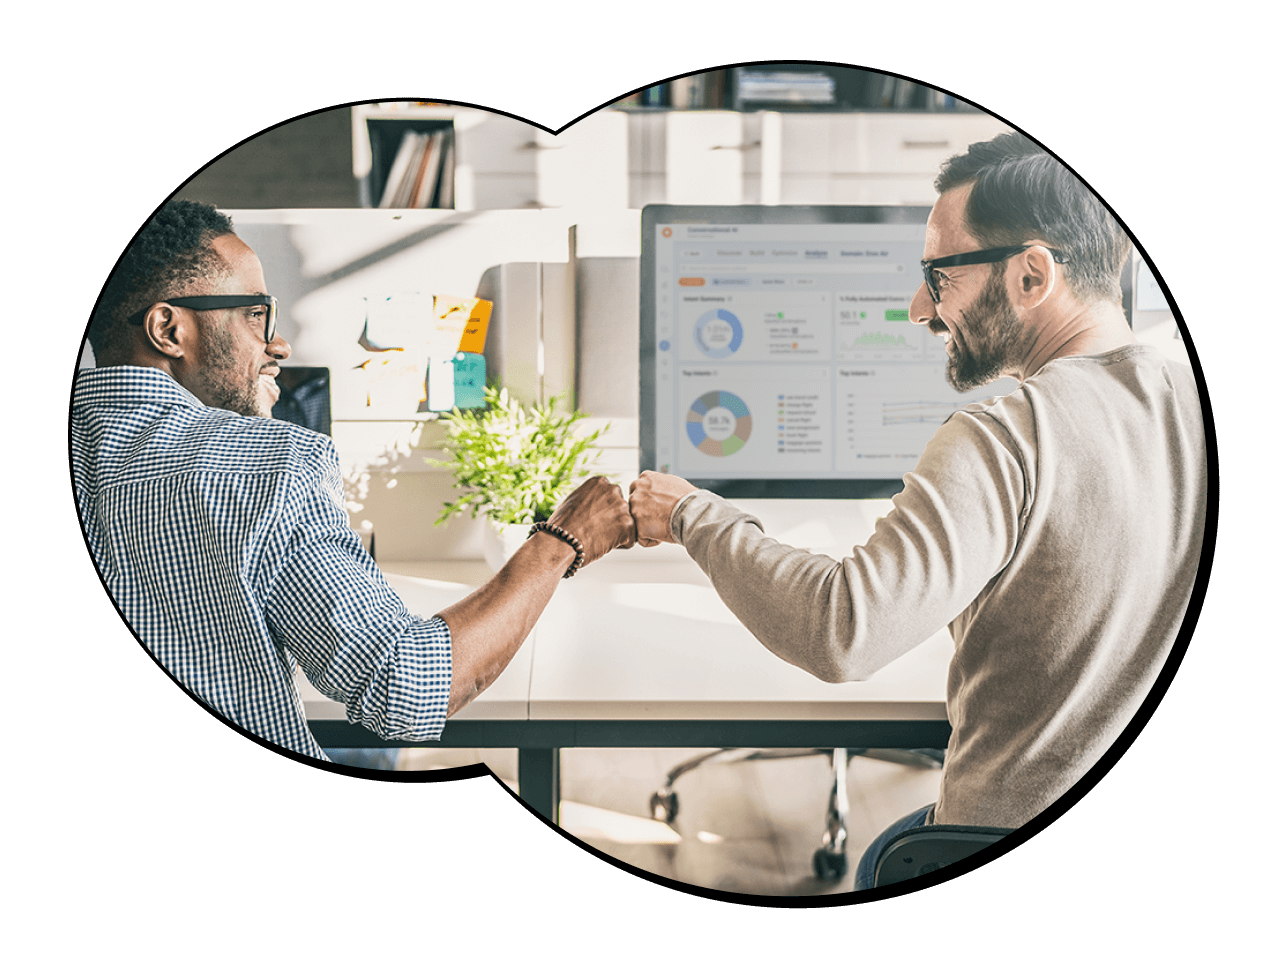 agents at contact centers fist-bumping to celebrate the use of an enterprise managed services provider for contact center solutions